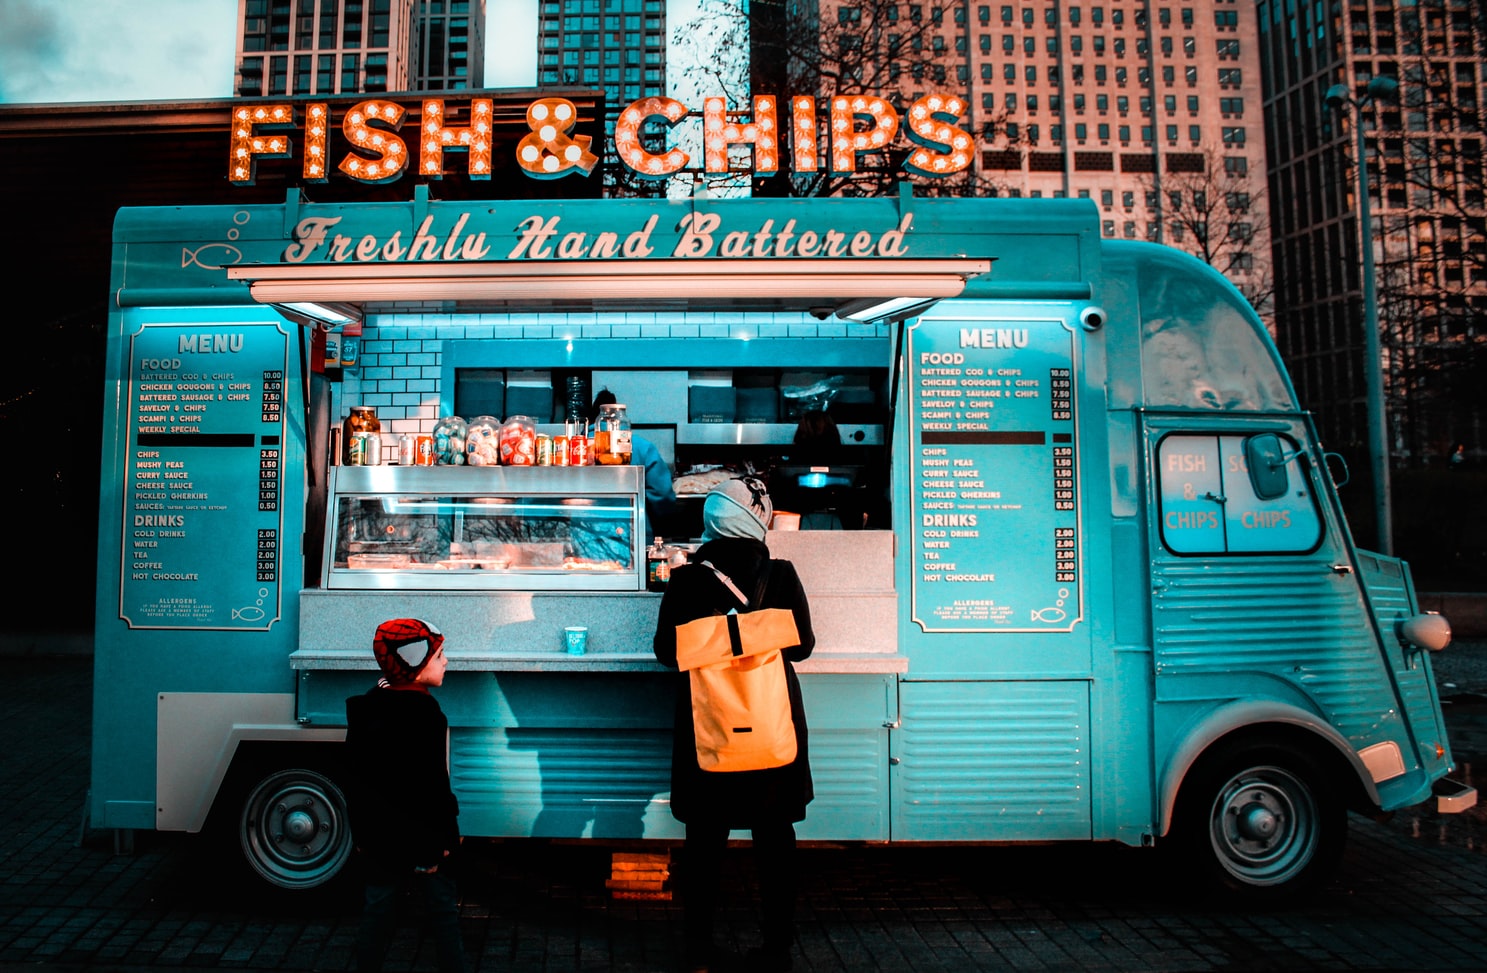 Things to Consider Before Purchasing a Food Truck